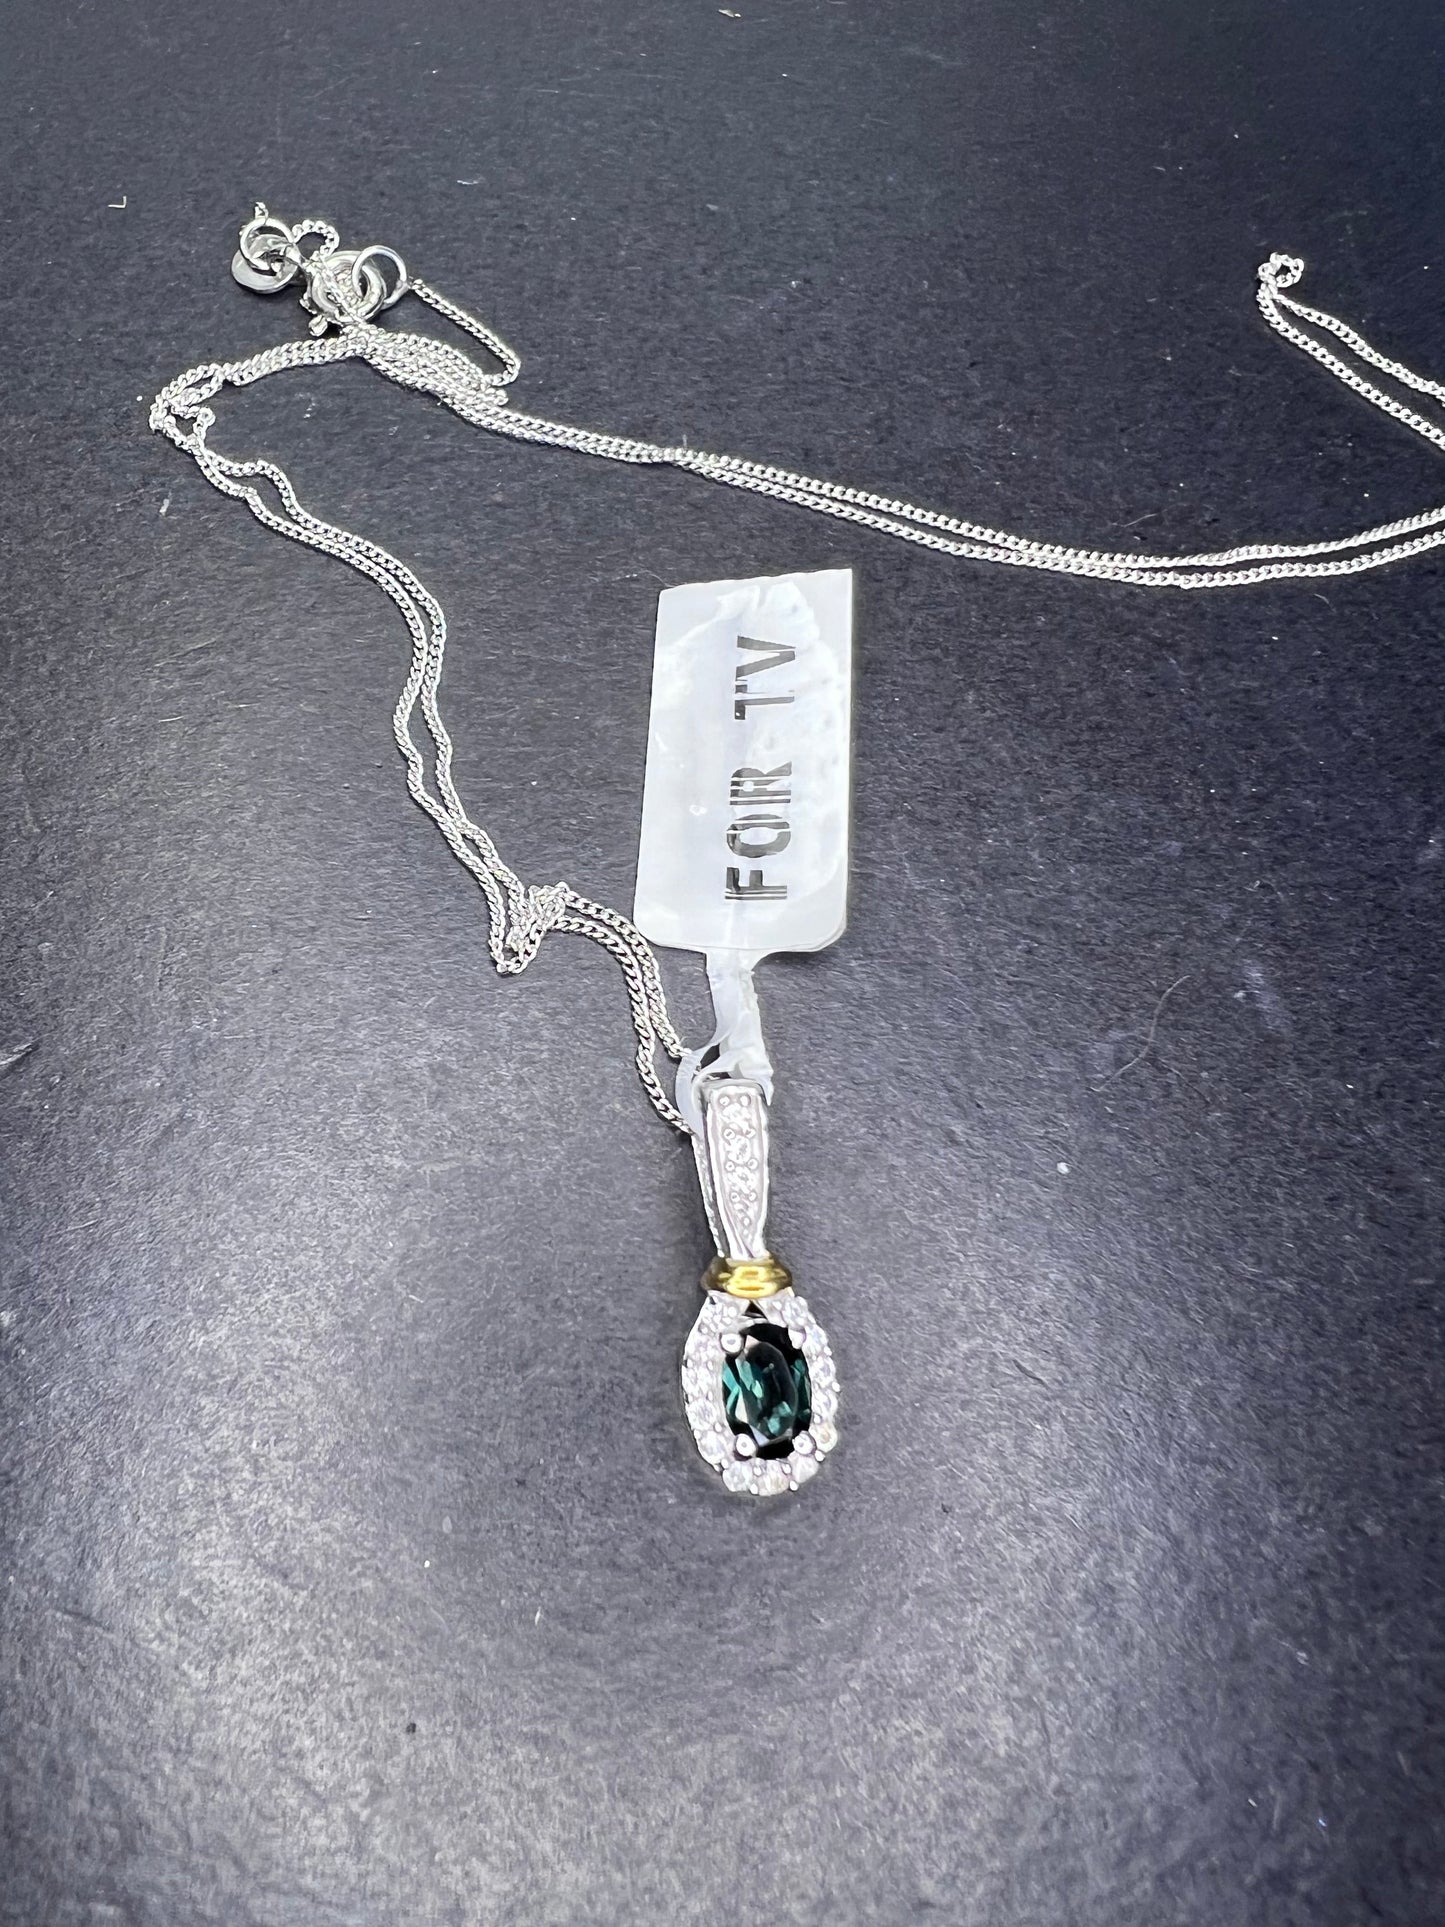 Indicolite tourmaline and zircon sterling silver pendant and 20 inch chain necklace